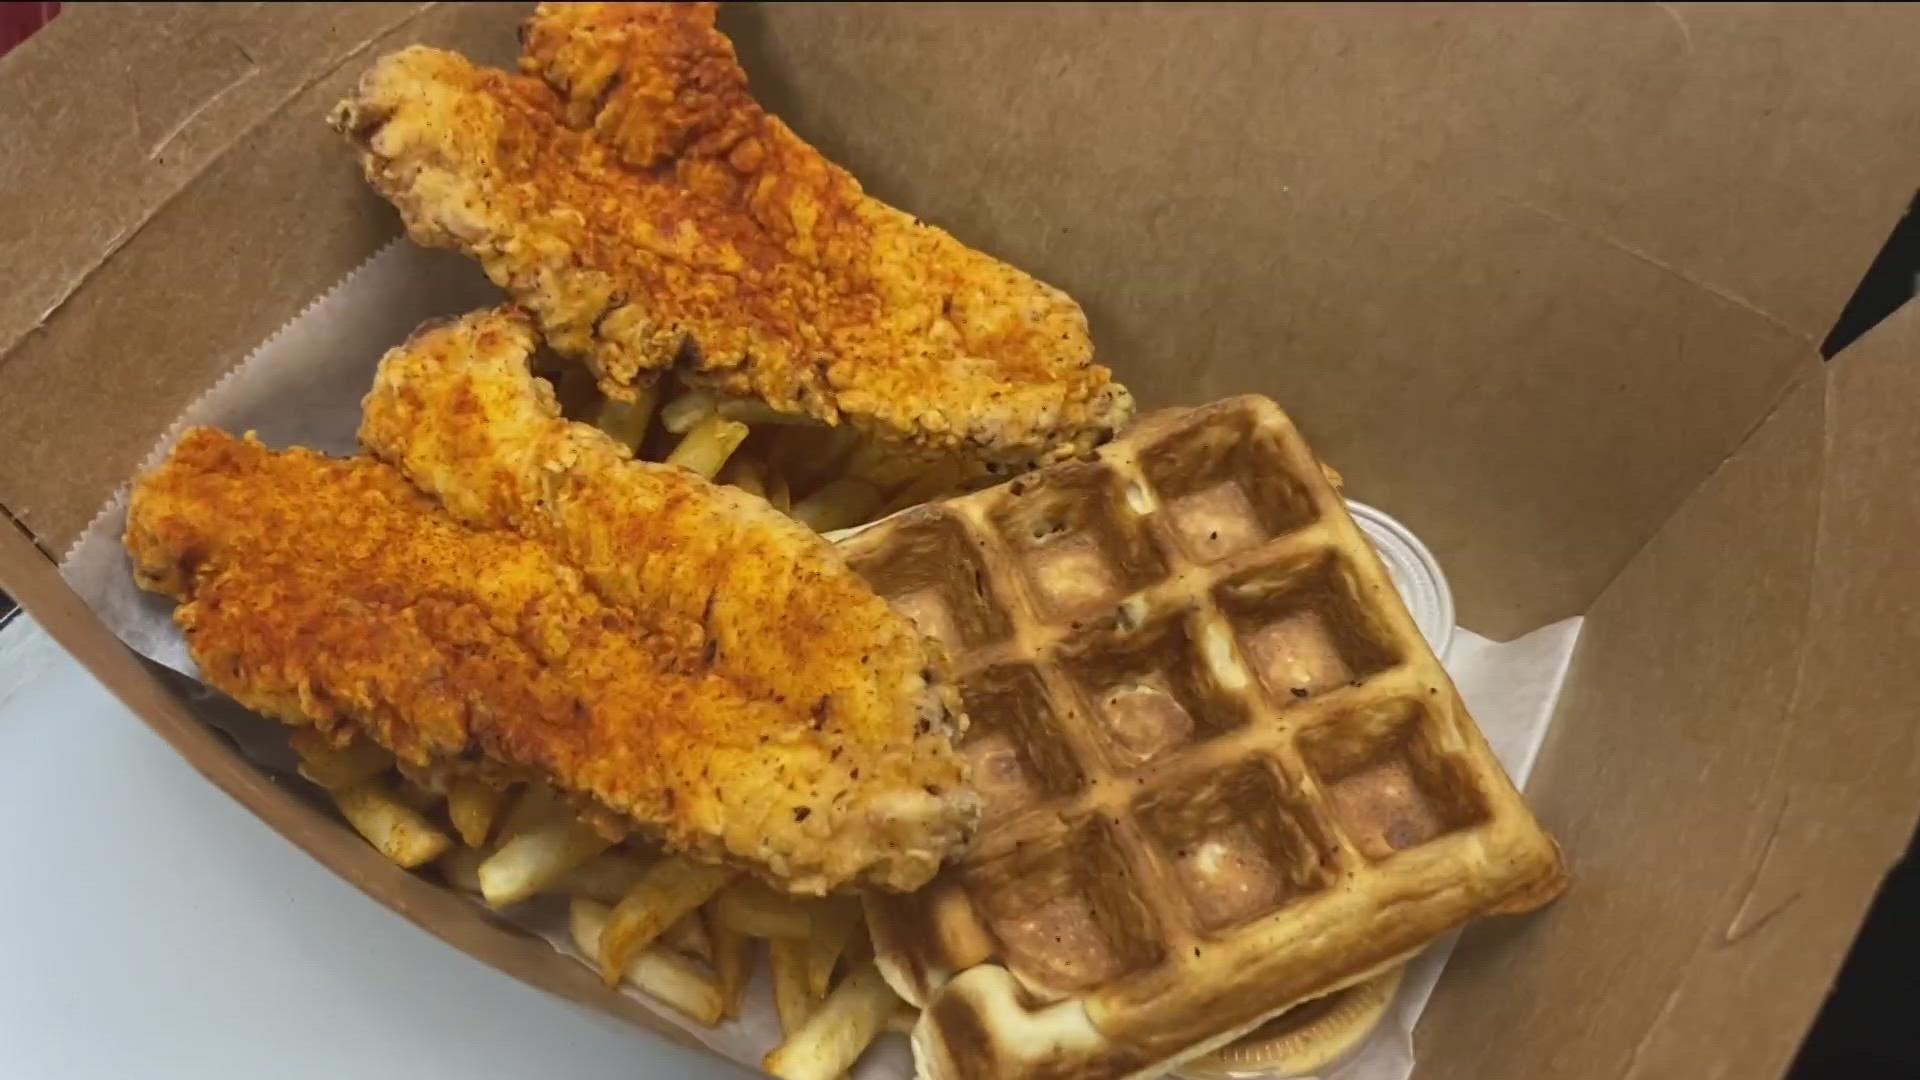 Ali's Chicken and Waffles serves a halal version of chicken and waffles. They also serve burritos and sandwiches.